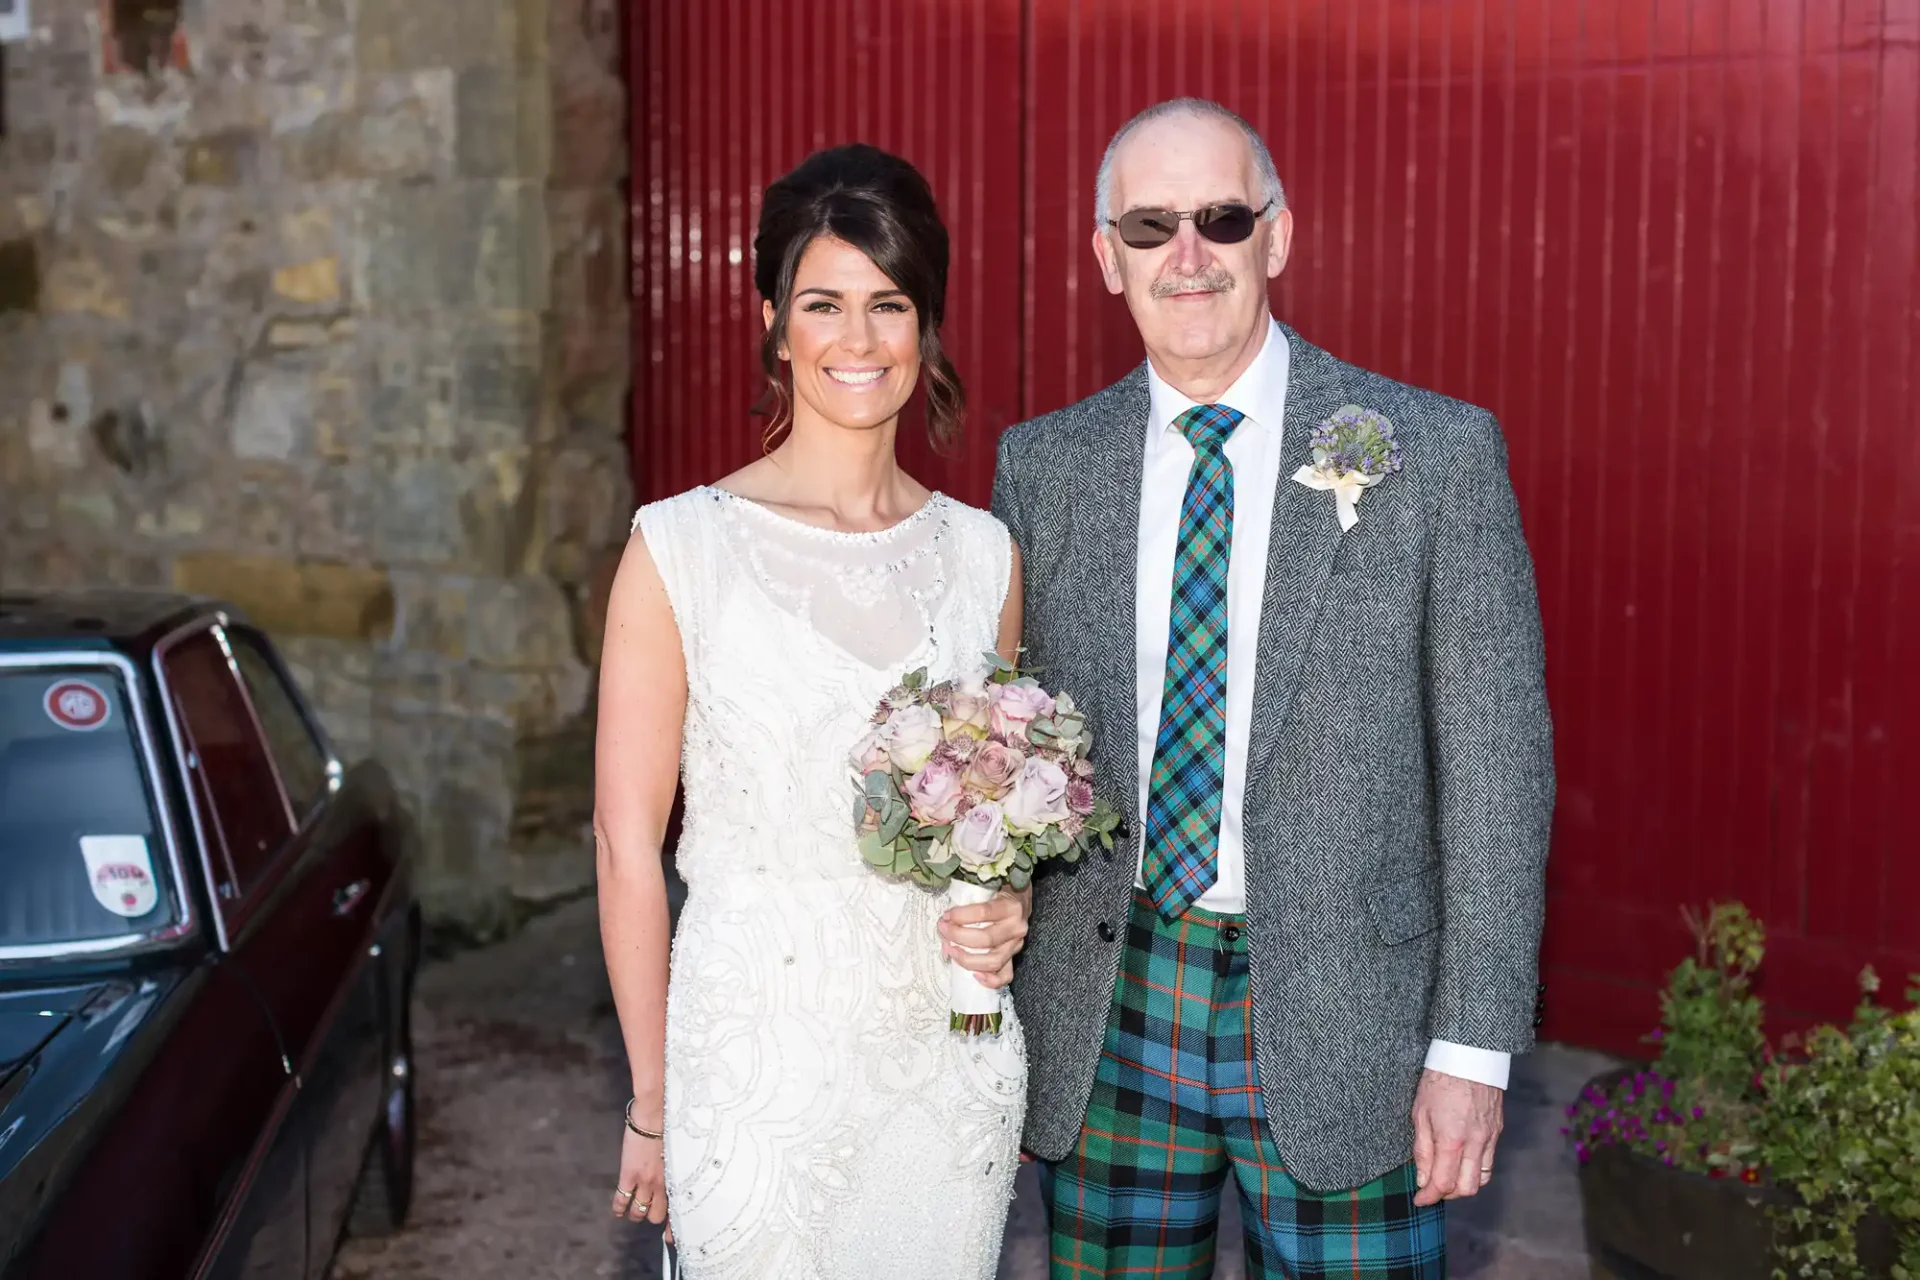 A bride in a white dress and a groom in a tartan kilt and gray jacket pose smiling beside a vintage car against a red background.